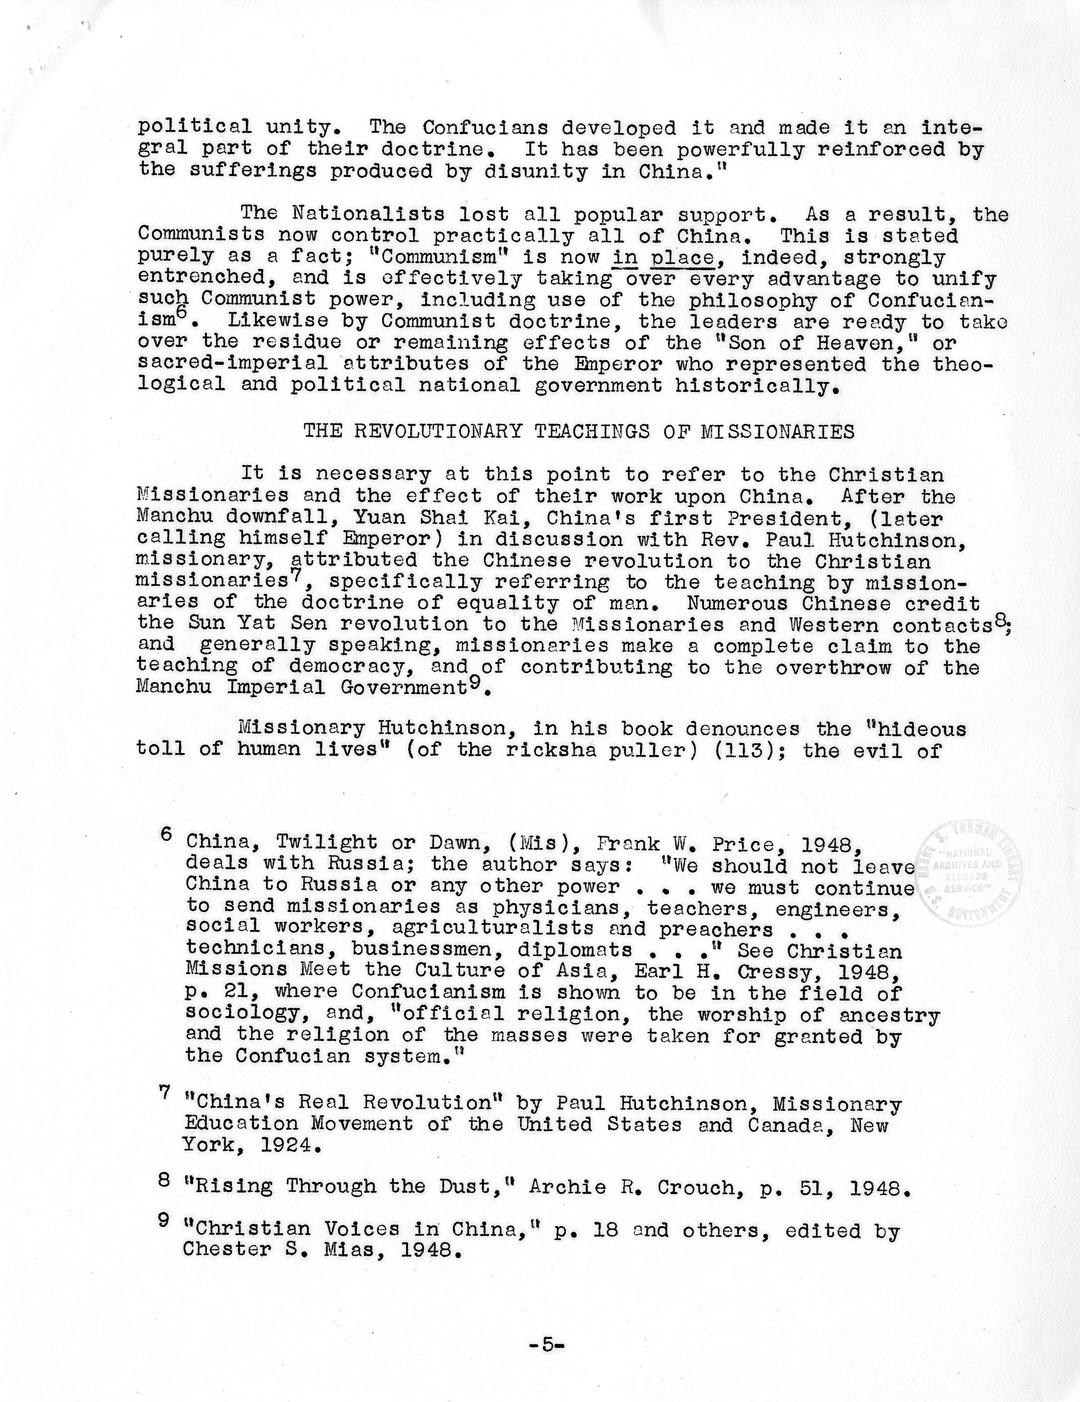 Memorandum by Maury Maverick, Concerning Asia (Principally China) and the Psychological Factors of Unity There